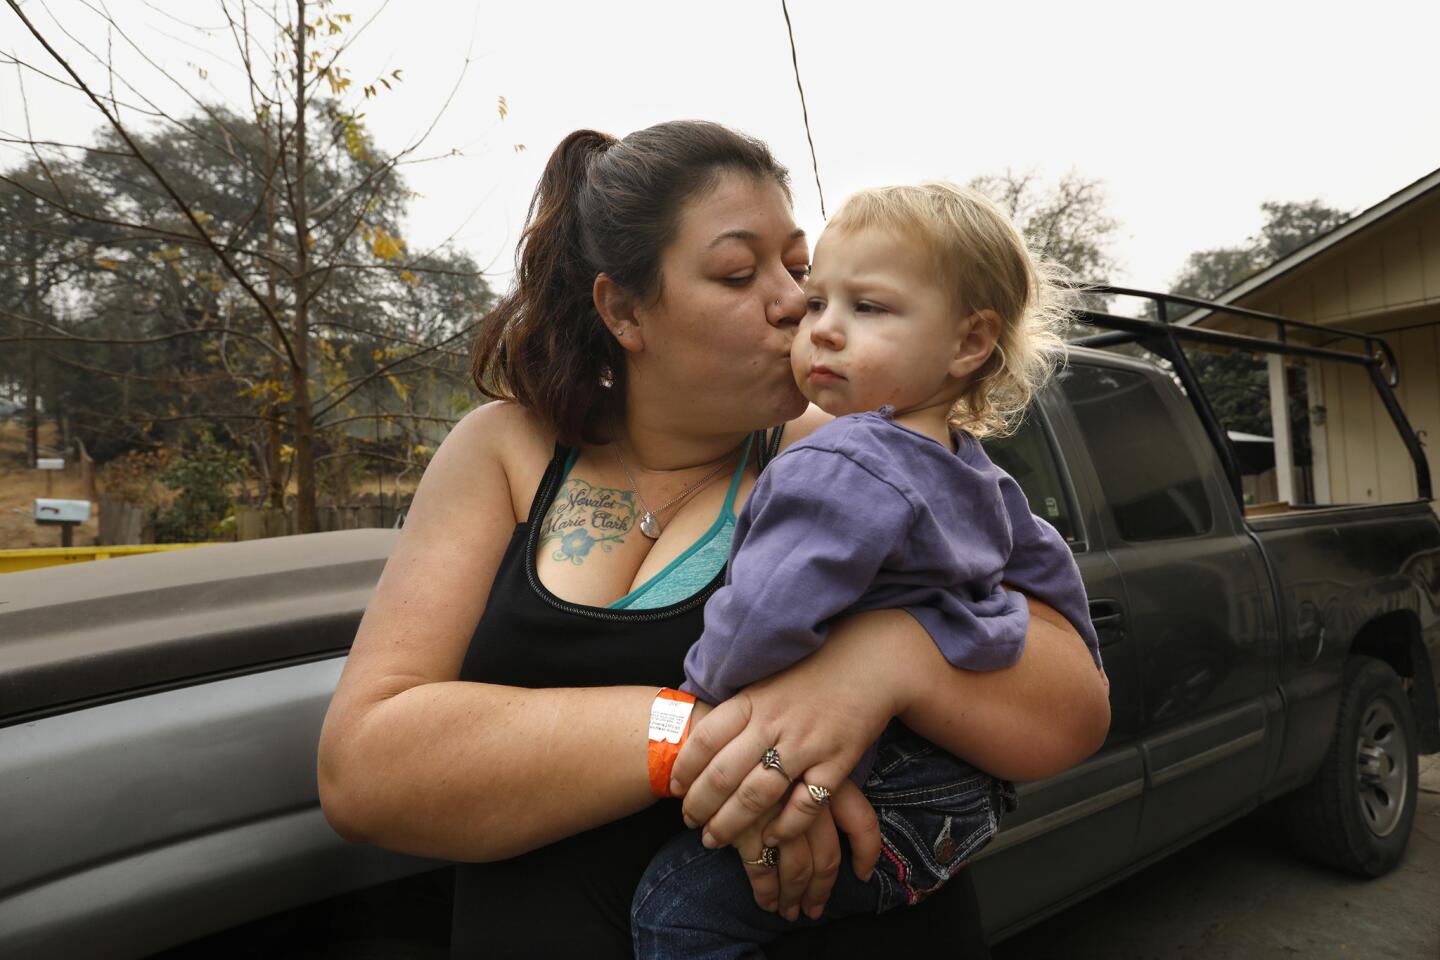 Megan Butler, 26, and her daughter Aurora, 2, are homeless after their house burned down in Concow in the Camp fire.